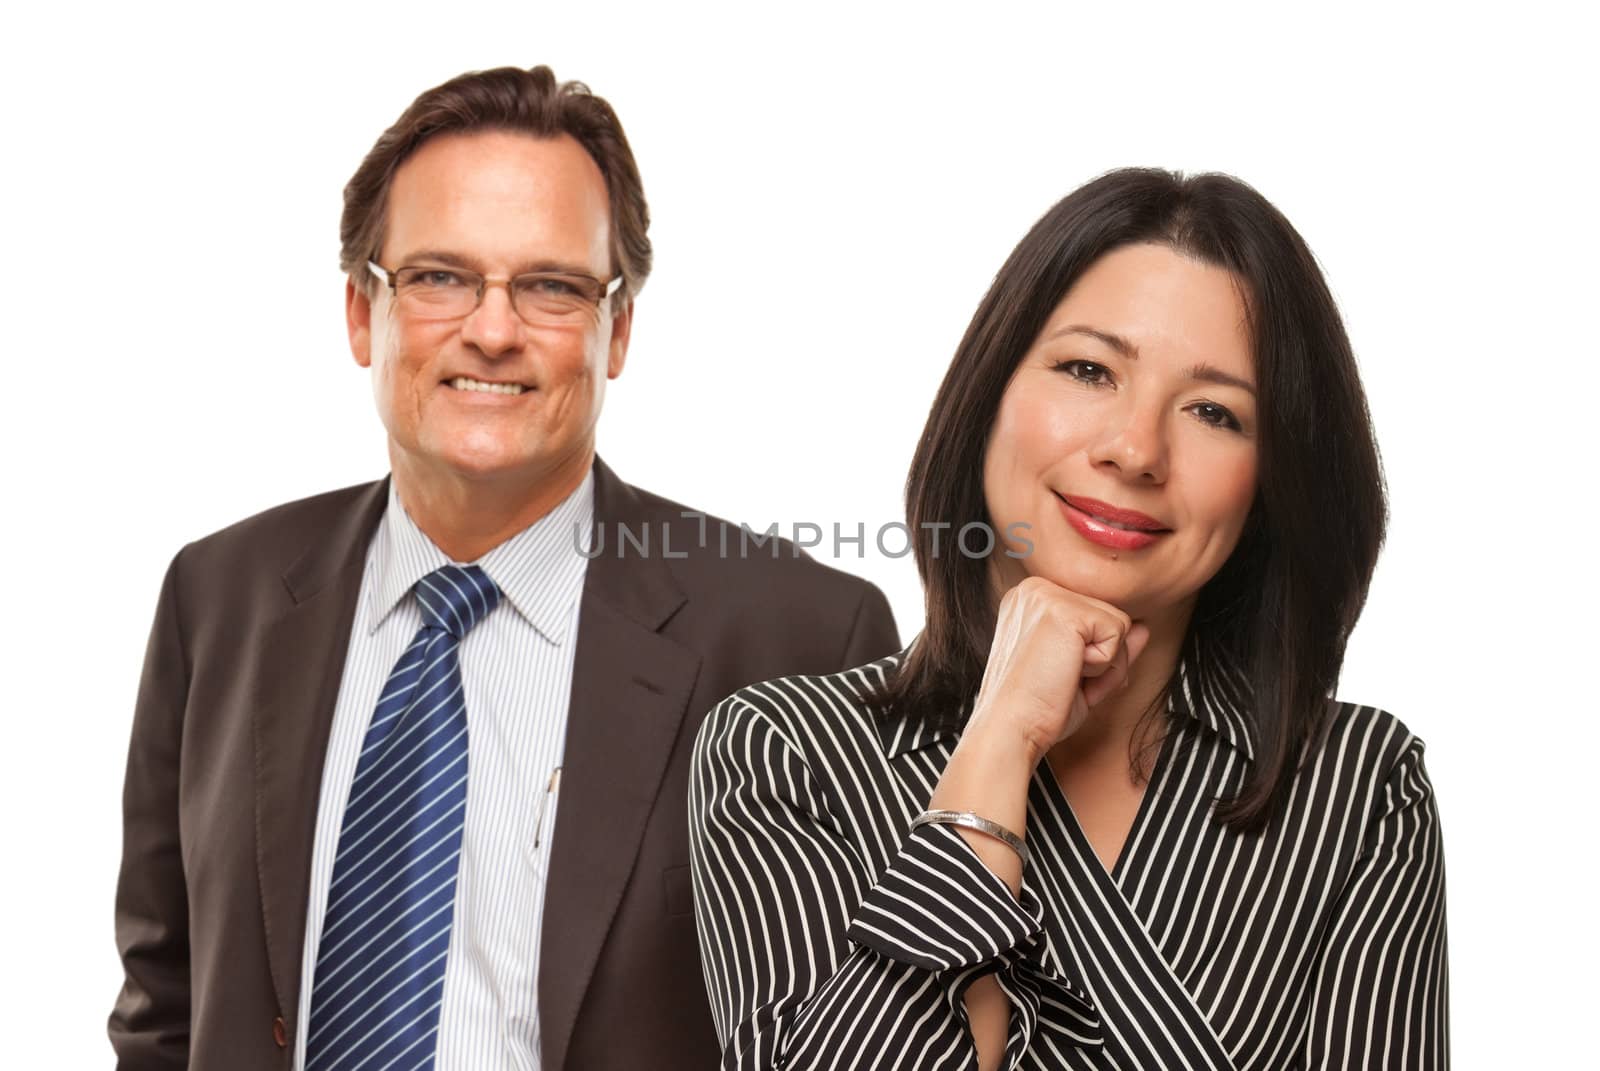 Attractive Hispanic Woman with Businessman Smiling in Suit and Tie Isolated on a White Background.